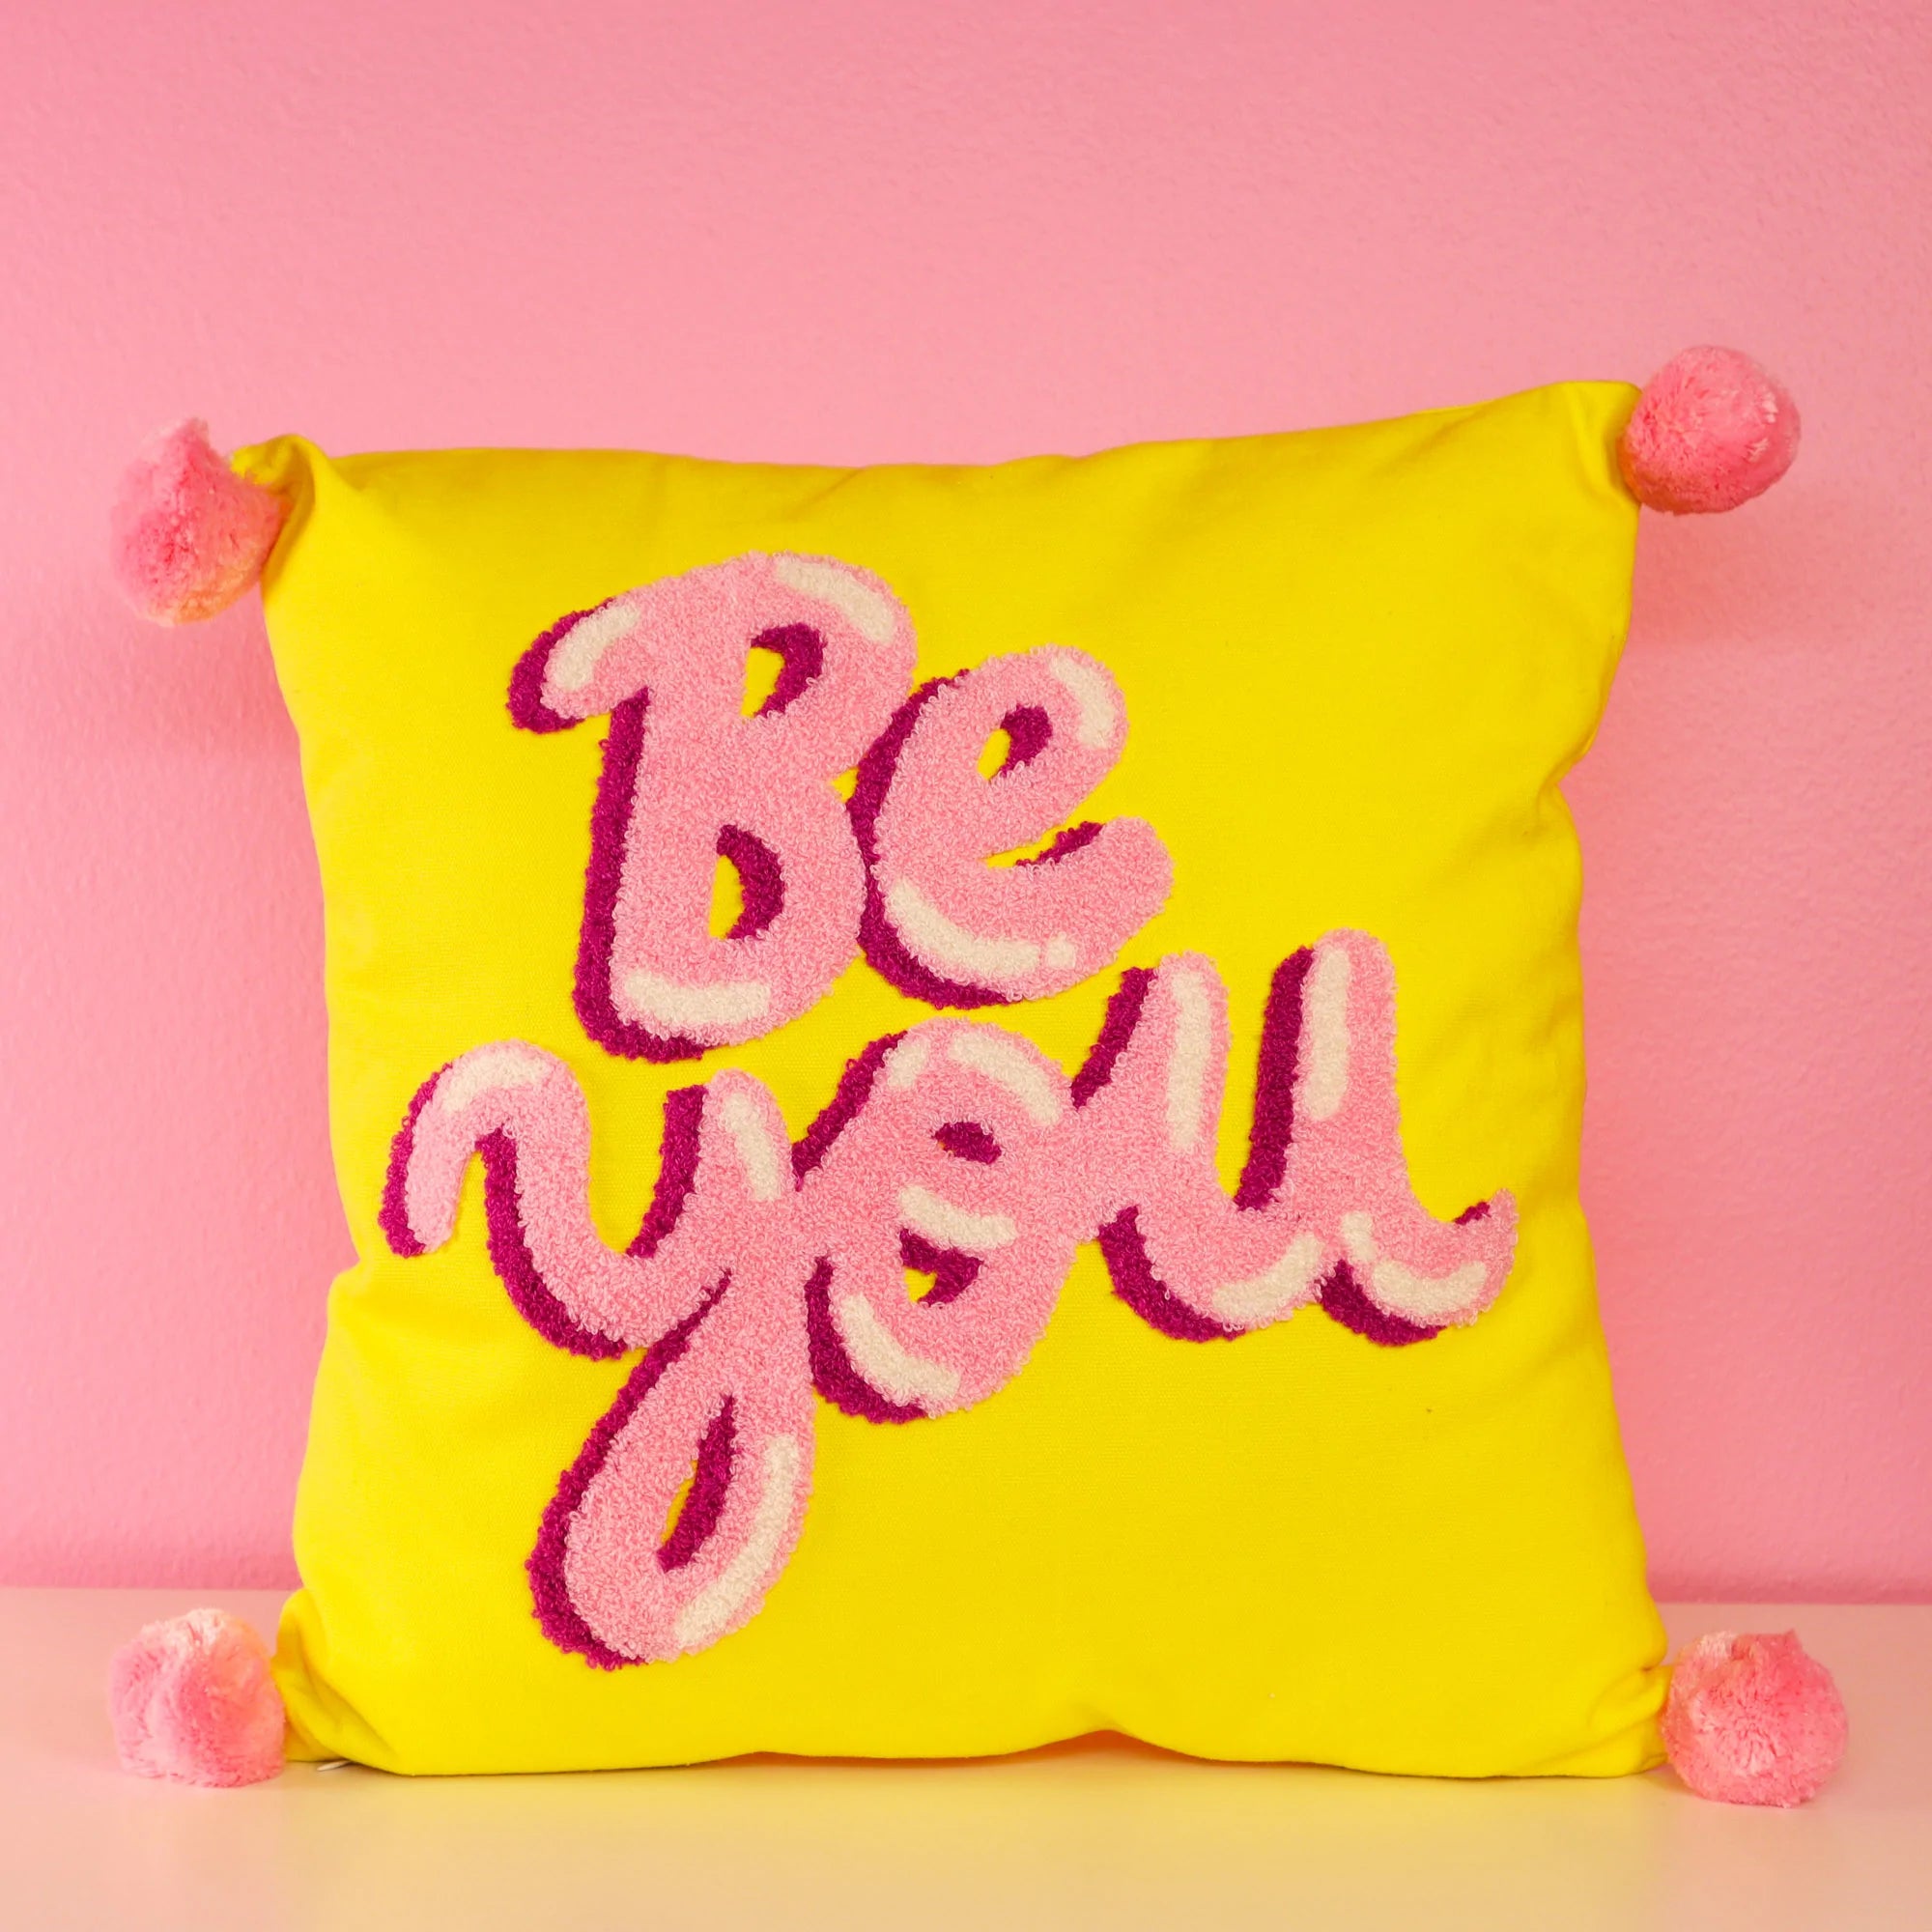 square hook pillow - be you